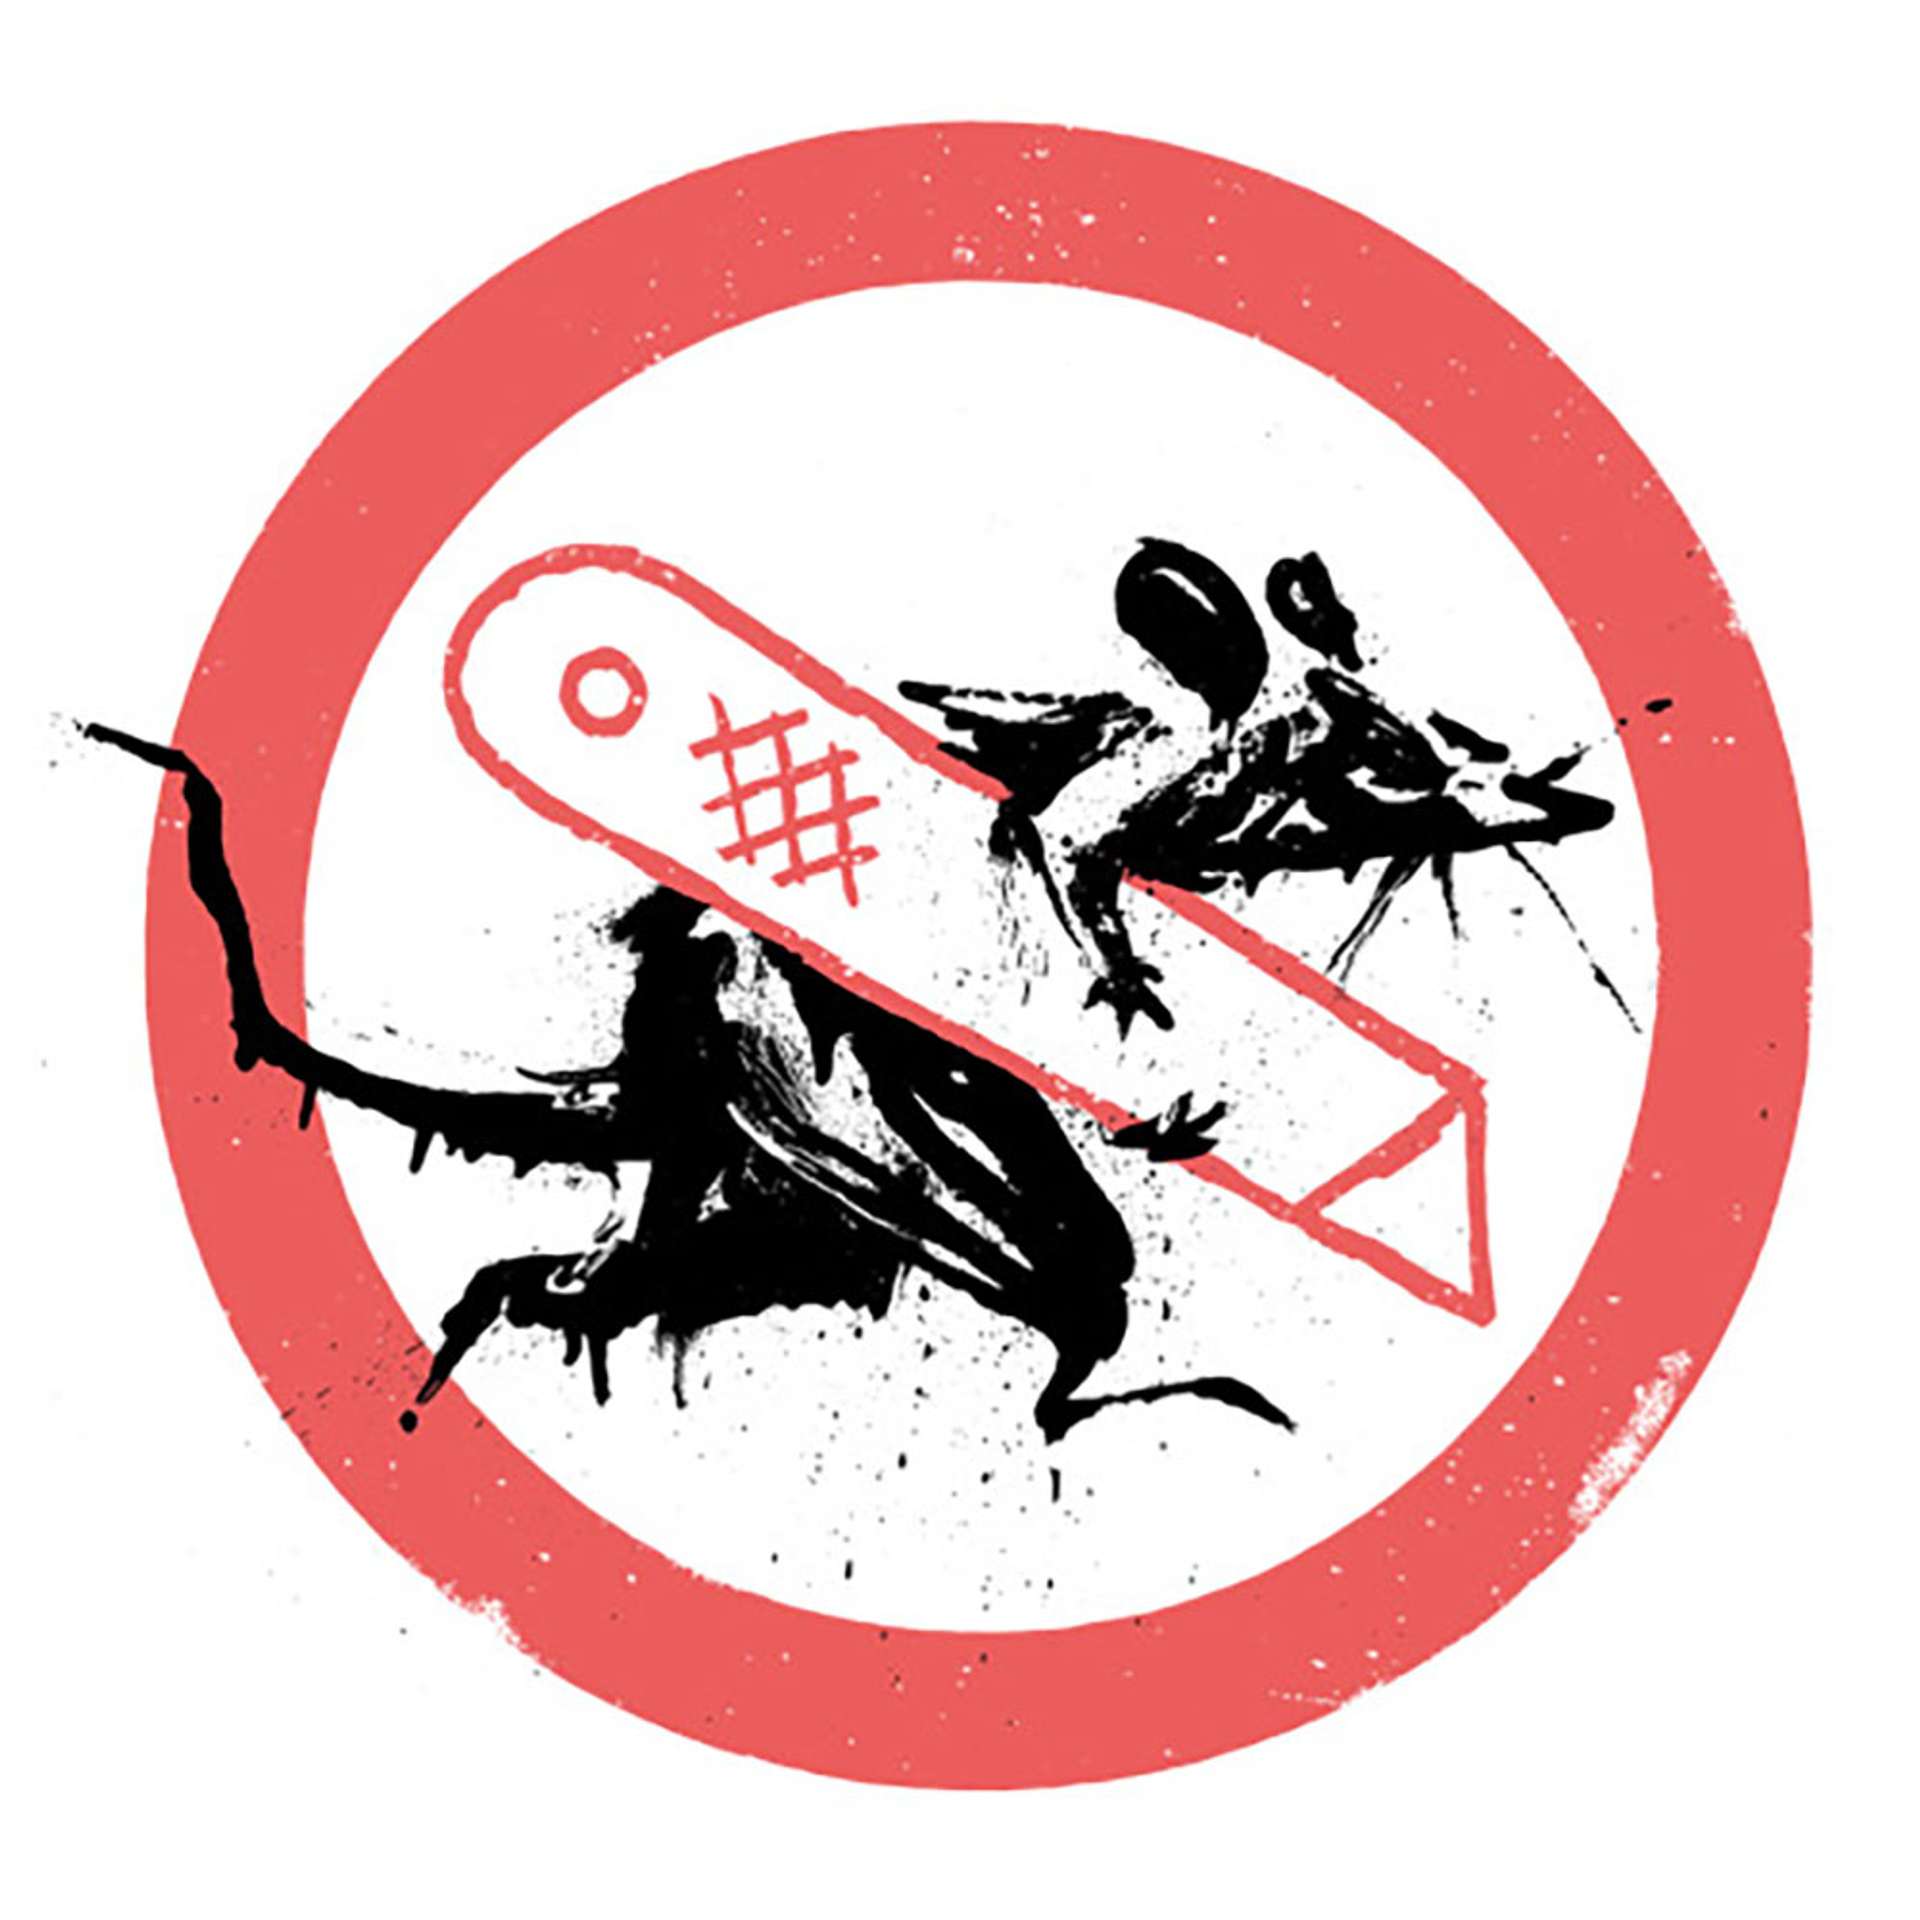 Banksy's exhibition logo for CUT & RUN, depicting a rat inside a red circle carrying a red craft knife.